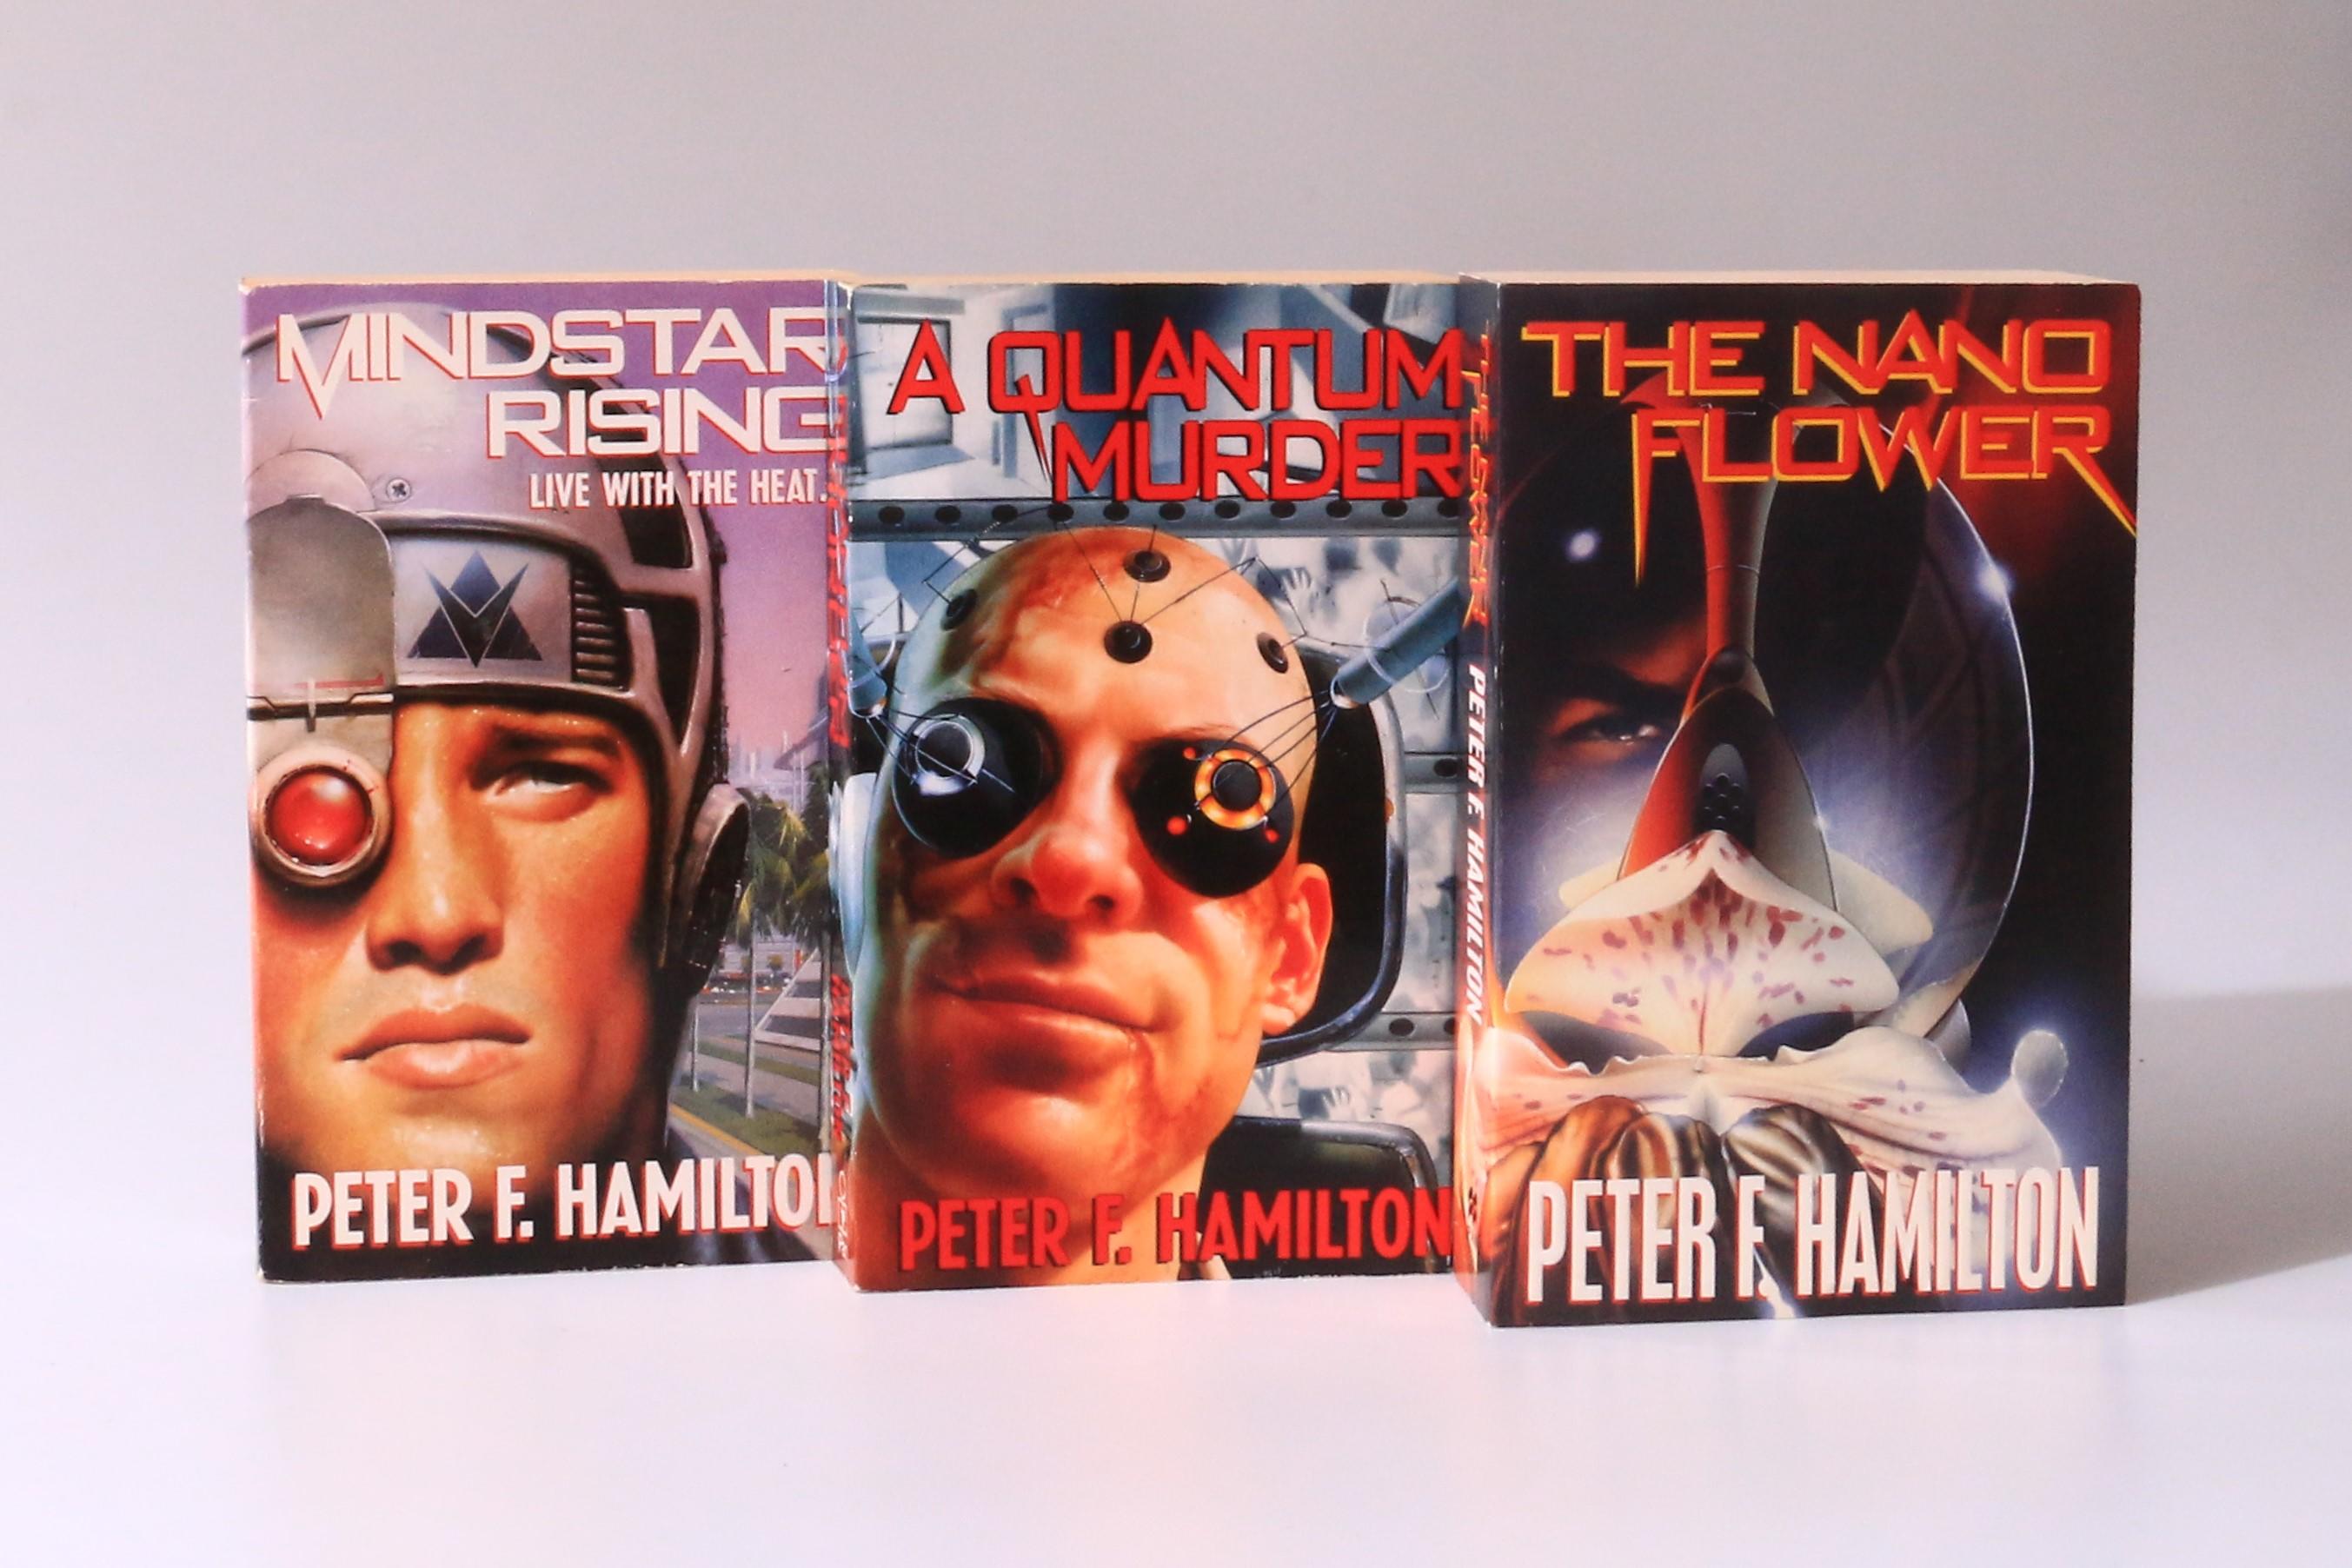 Peter F. Hamilton - The Greg Mandel Trilogy [comprising] Mindstar Rising, A Quantum Murder, and The Nano Flower - Pan, 1993-1995, Signed First Edition.